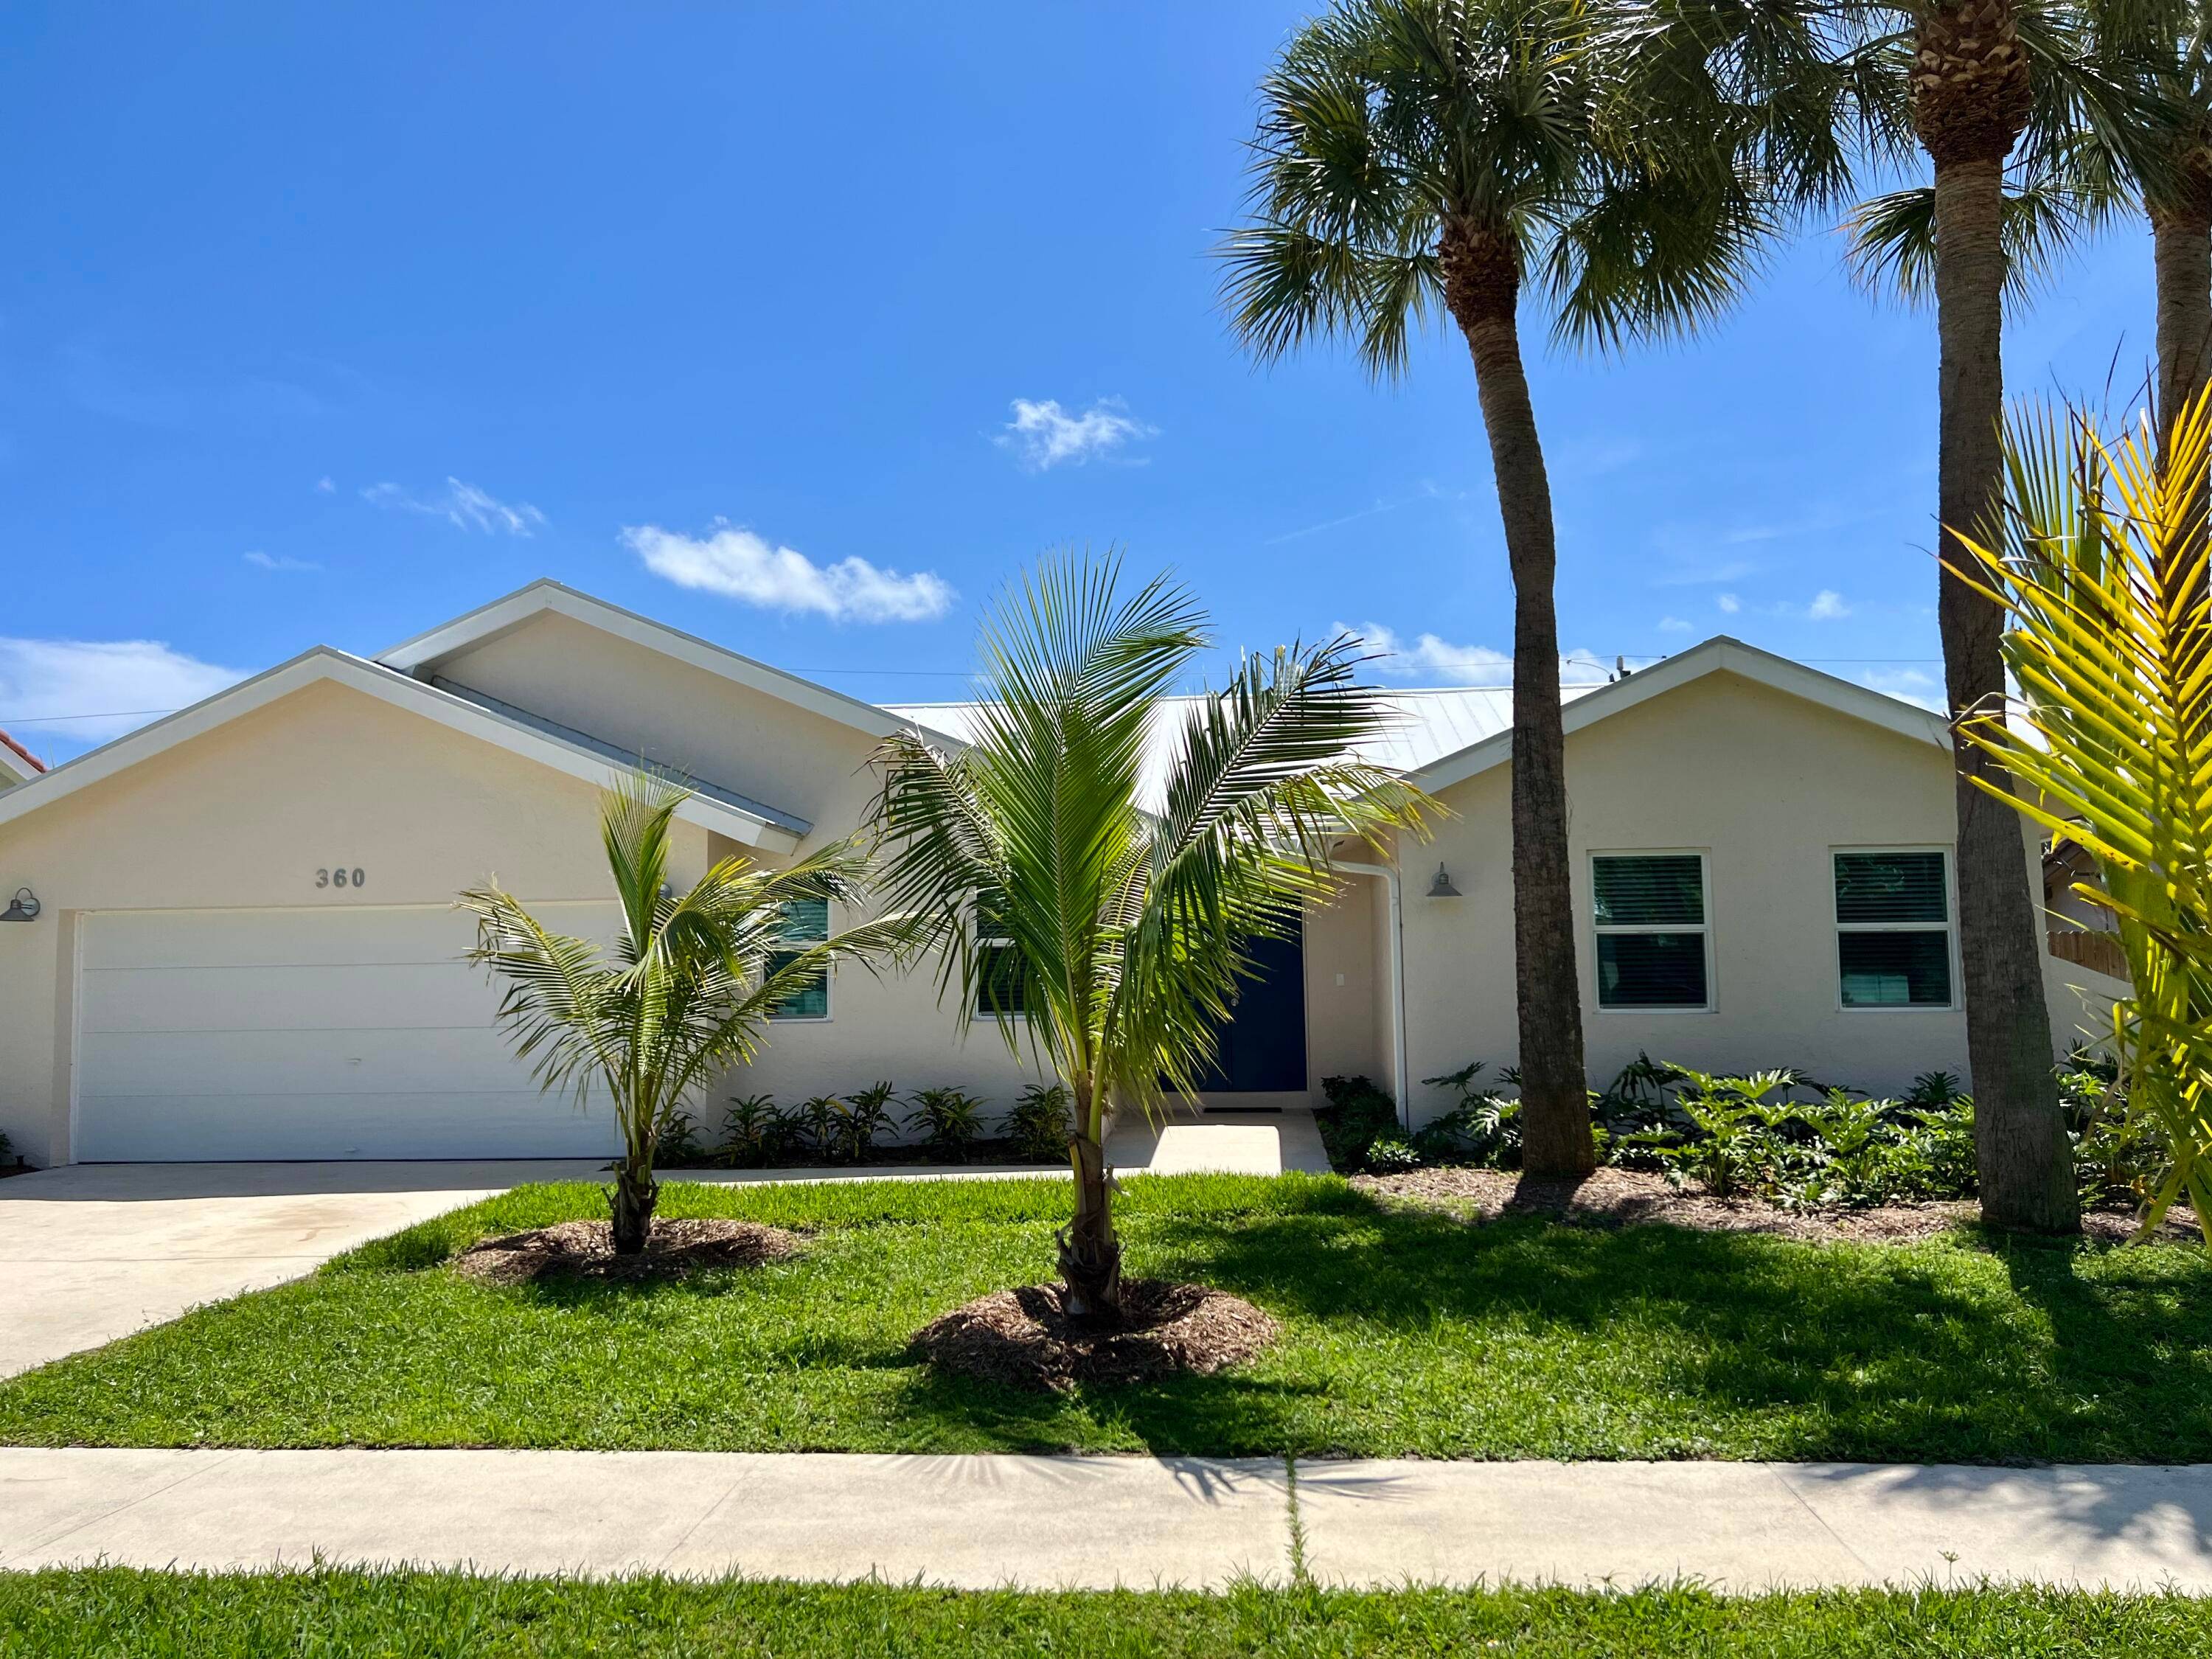 This recently remodeled spacious, open floor plan shows off 15ft vaulted ceilings w skylights, new impact windows doors and ceramic tile throughout.